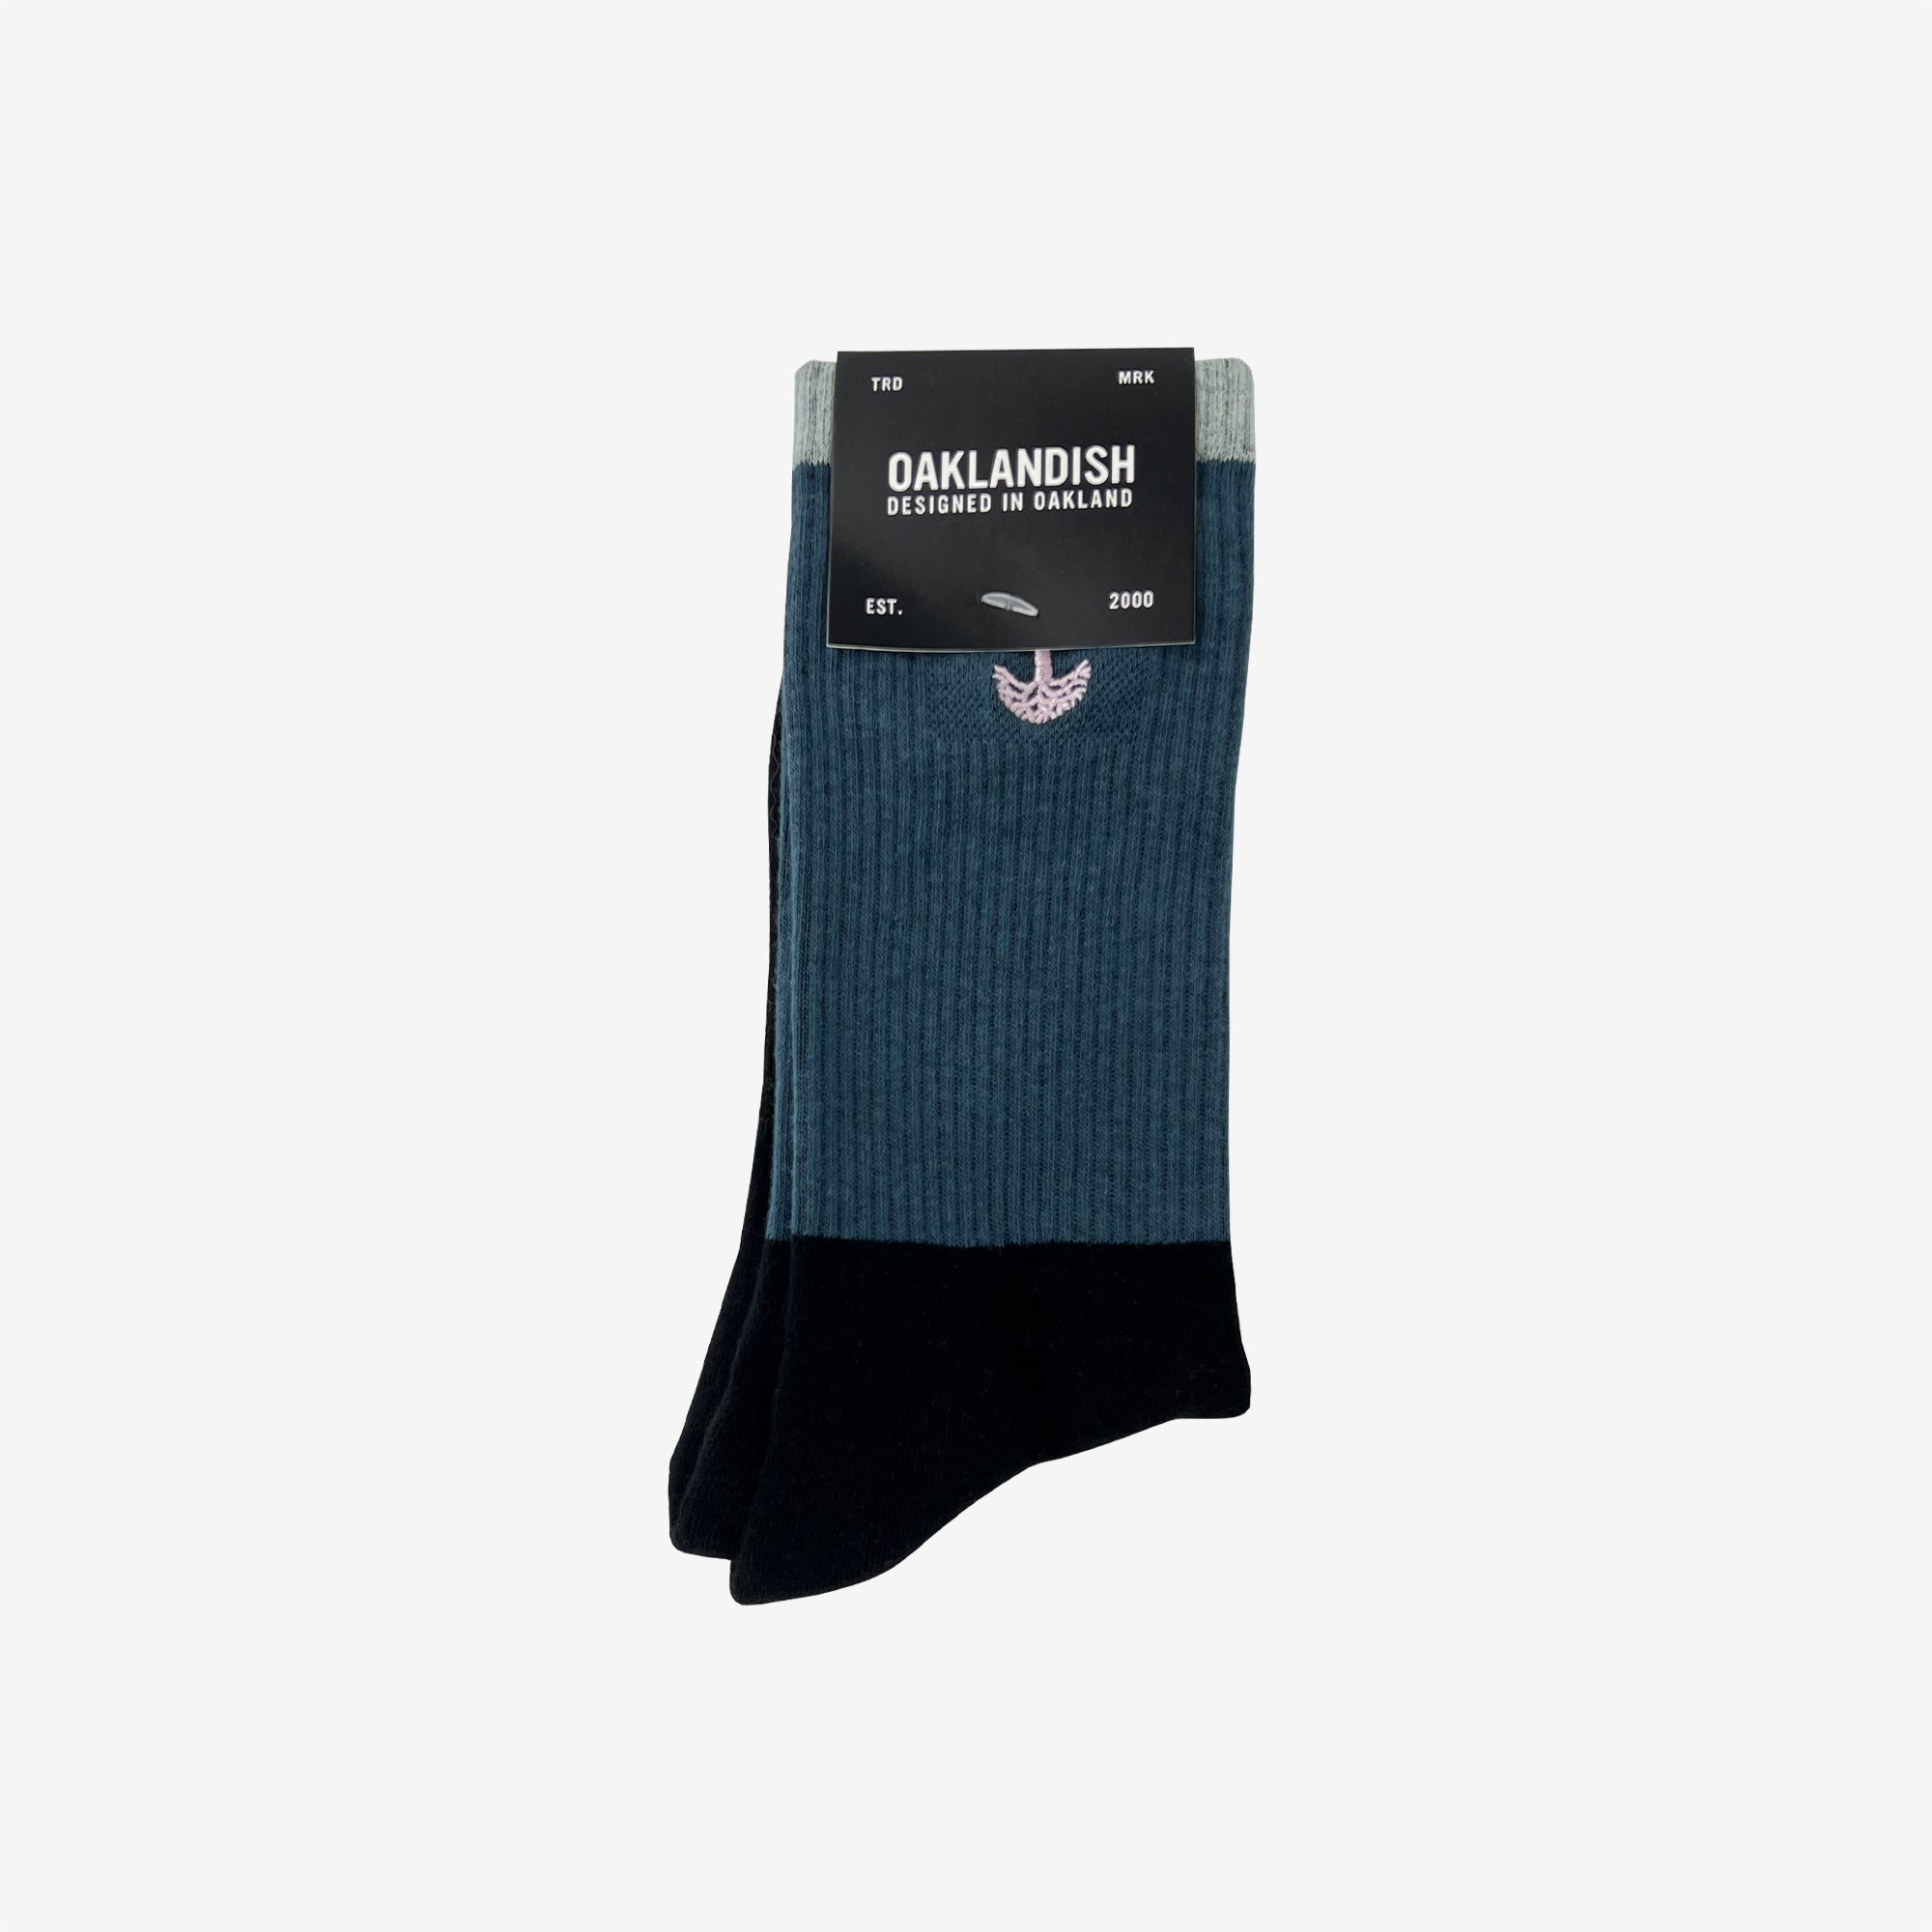 High-cut color blocked crew socks folded into an Oaklandish retail package.